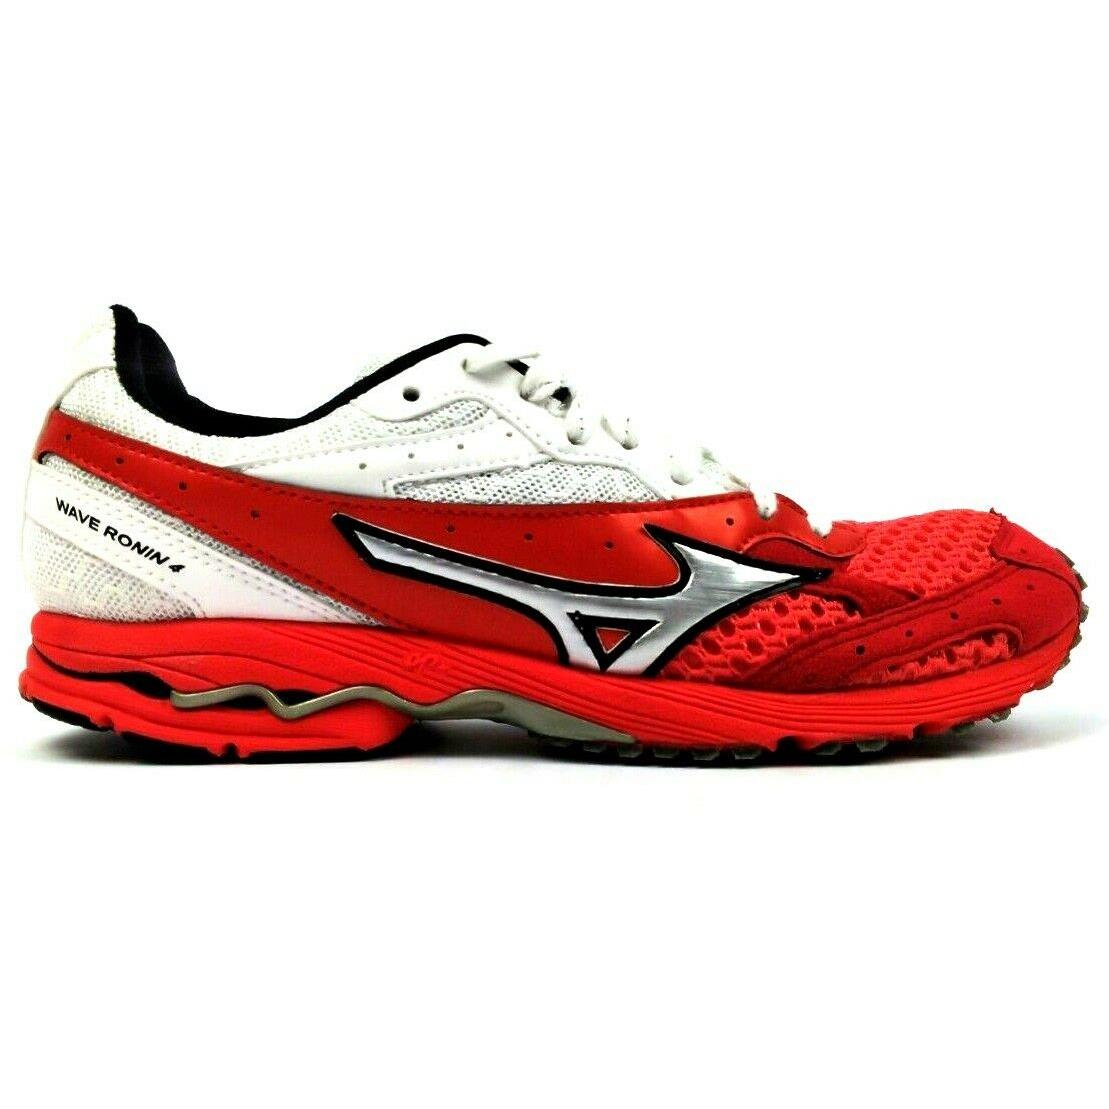 Mizuno Women`s Wave Ronin 4 Running Shoes Spicy Red White Silver Size 6.5W